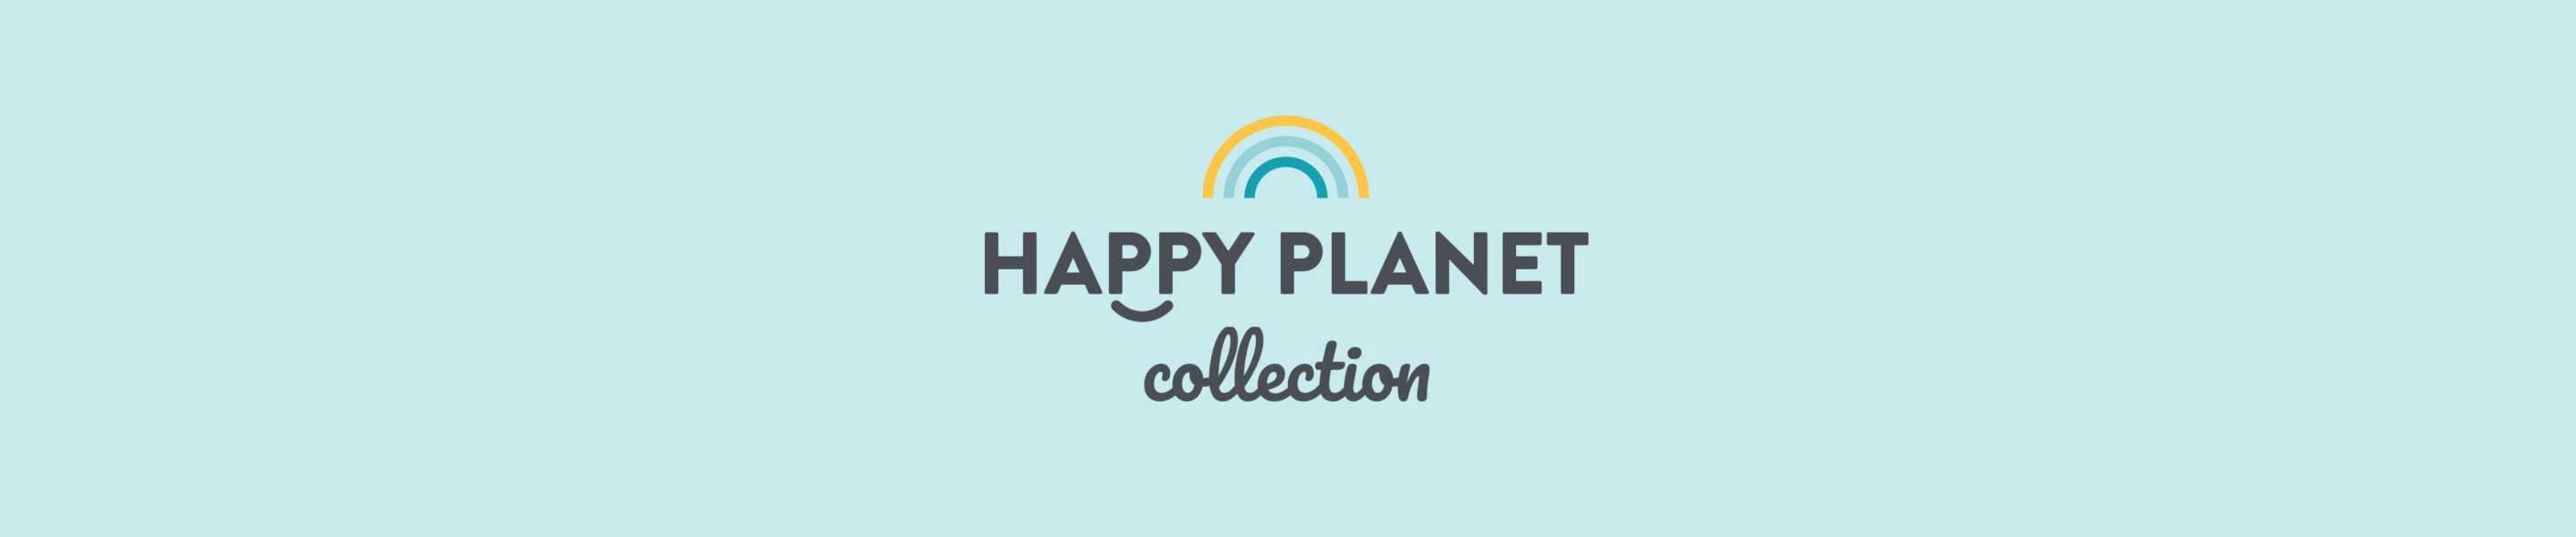 happy planet collection slim banner